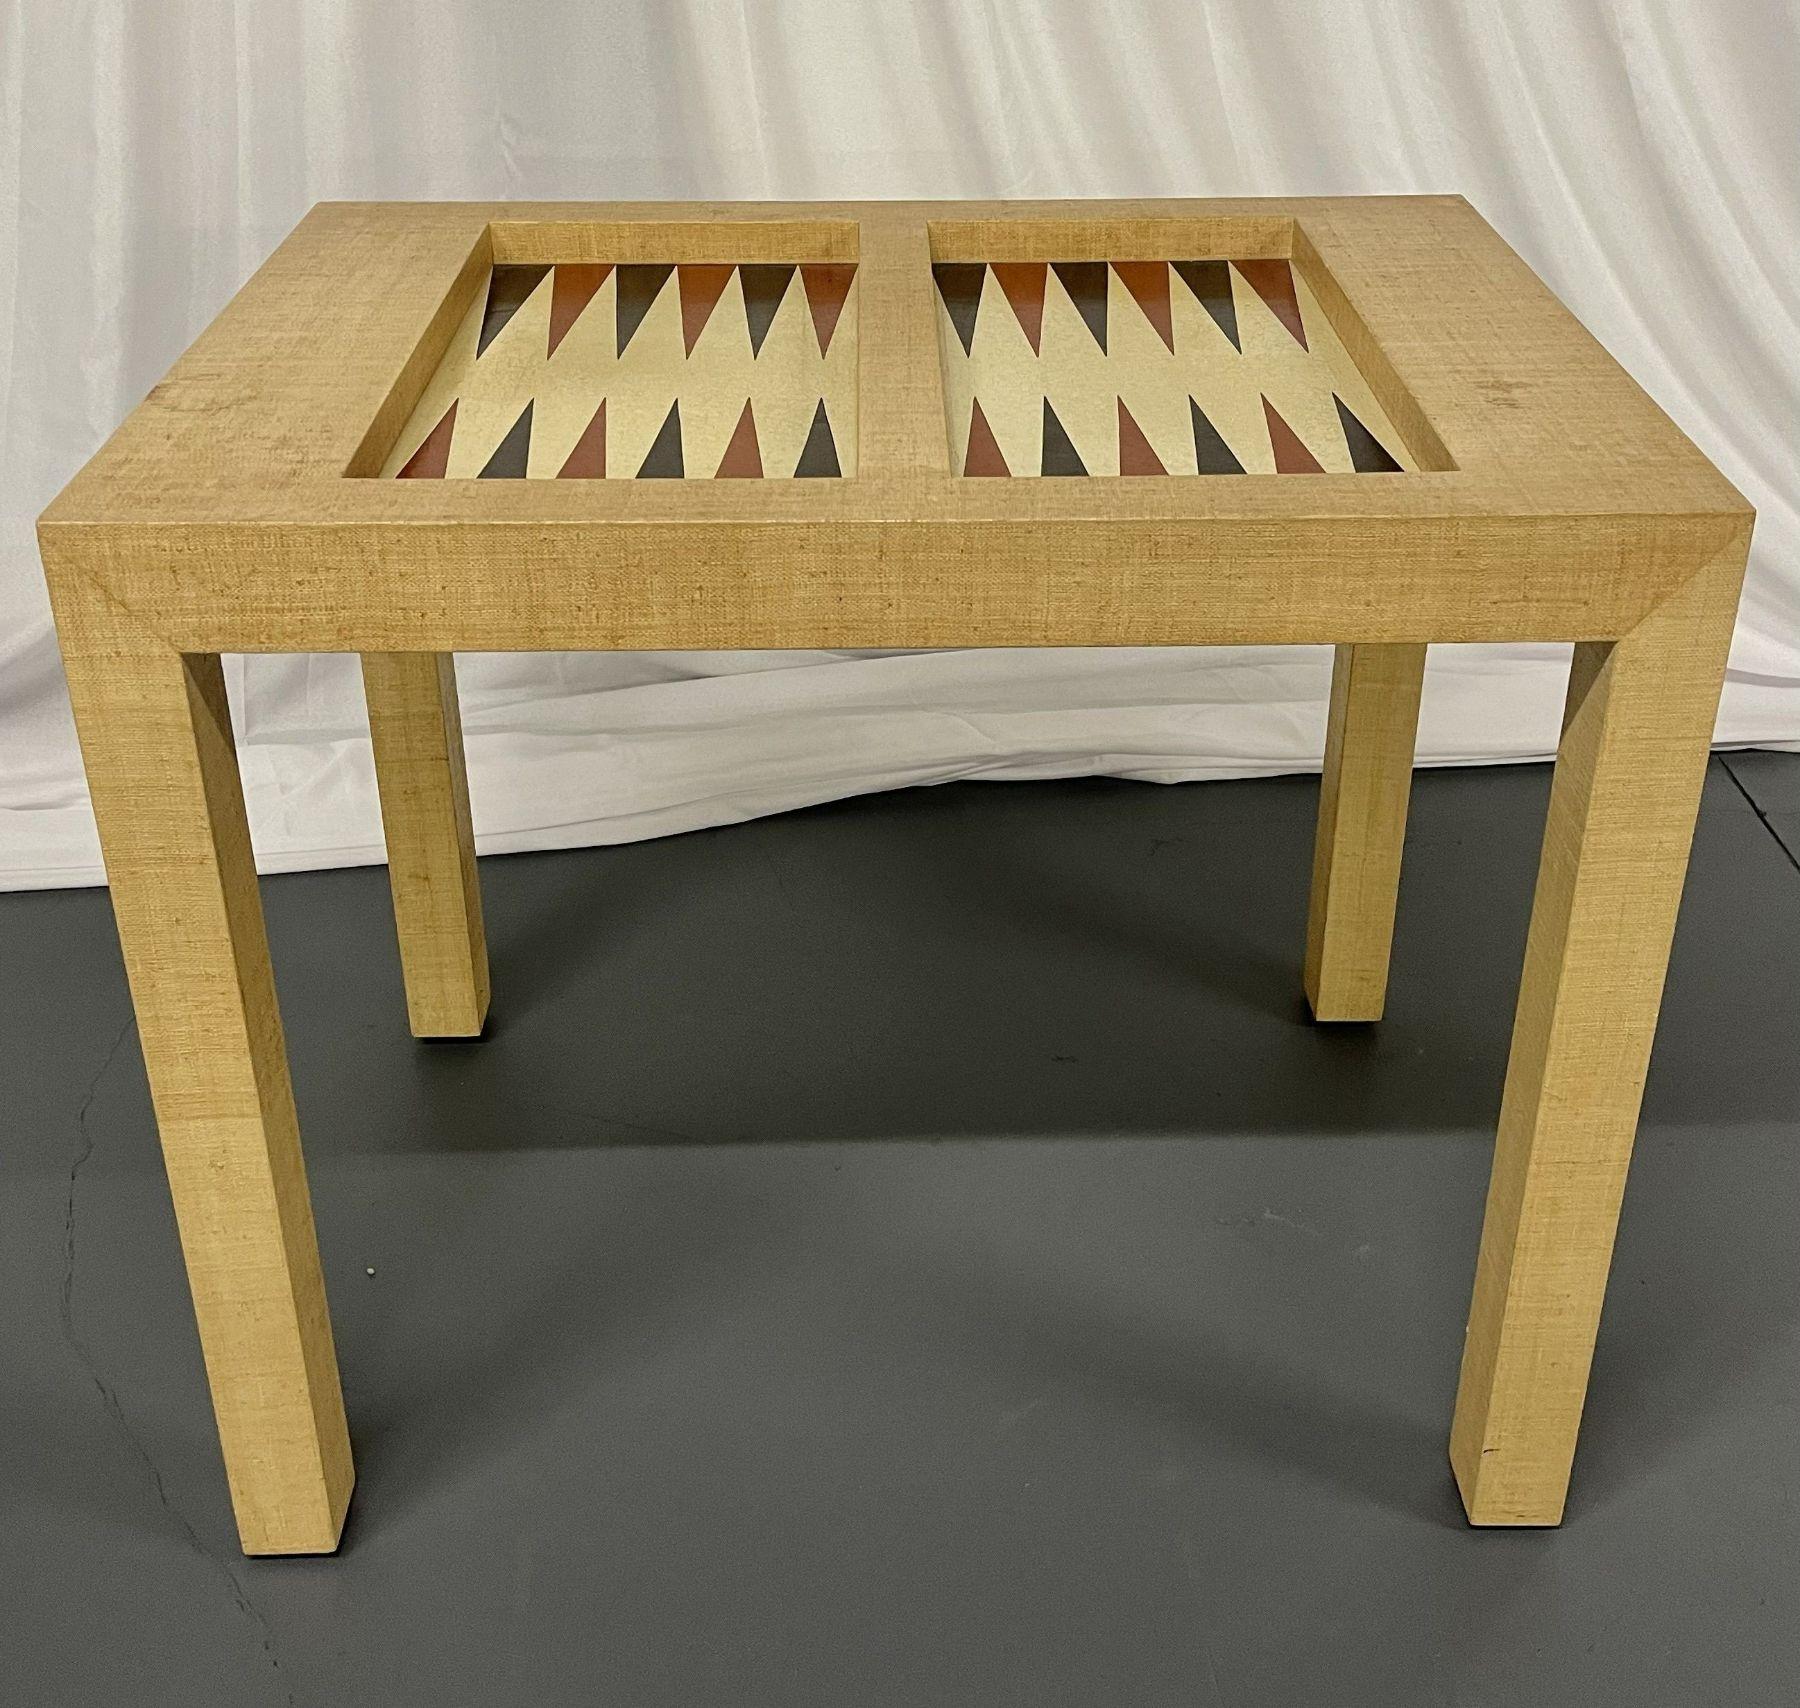 Mid-Century Modern Karl Springer style game table, linen wrapped, Backgammon

Fine Mid-Century Modern game table in good condition. 

Other American designers of the period include Adrian Pearsall, Milo Baughman, Vladimir Kagan, Paul McCobb,